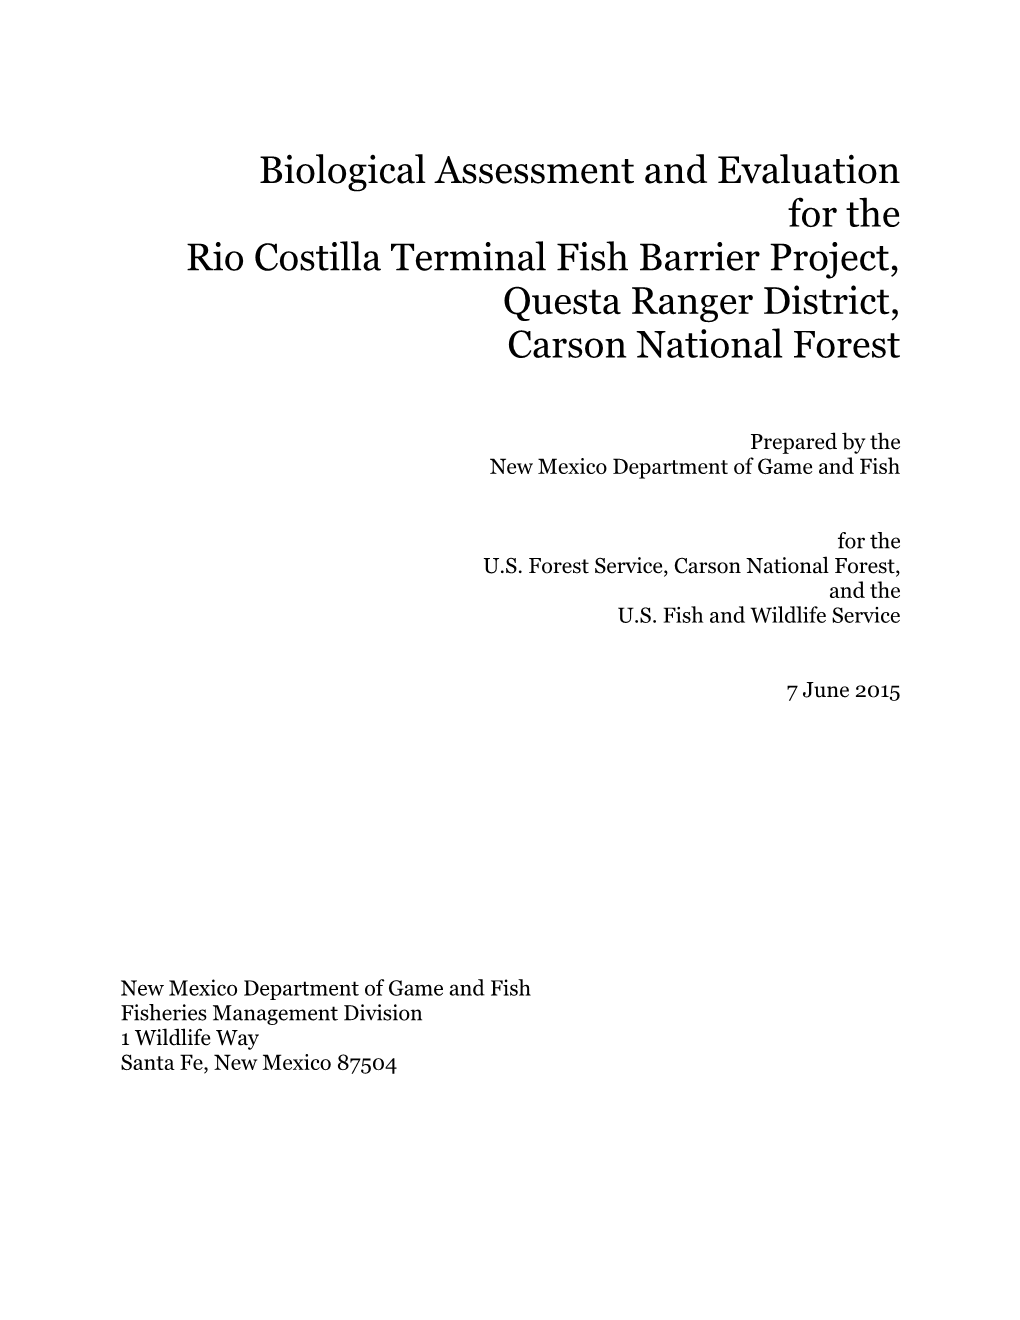 Biological Assessment and Evaluation for the Rio Costilla Terminal Fish Barrier Project, Questa Ranger District, Carson National Forest